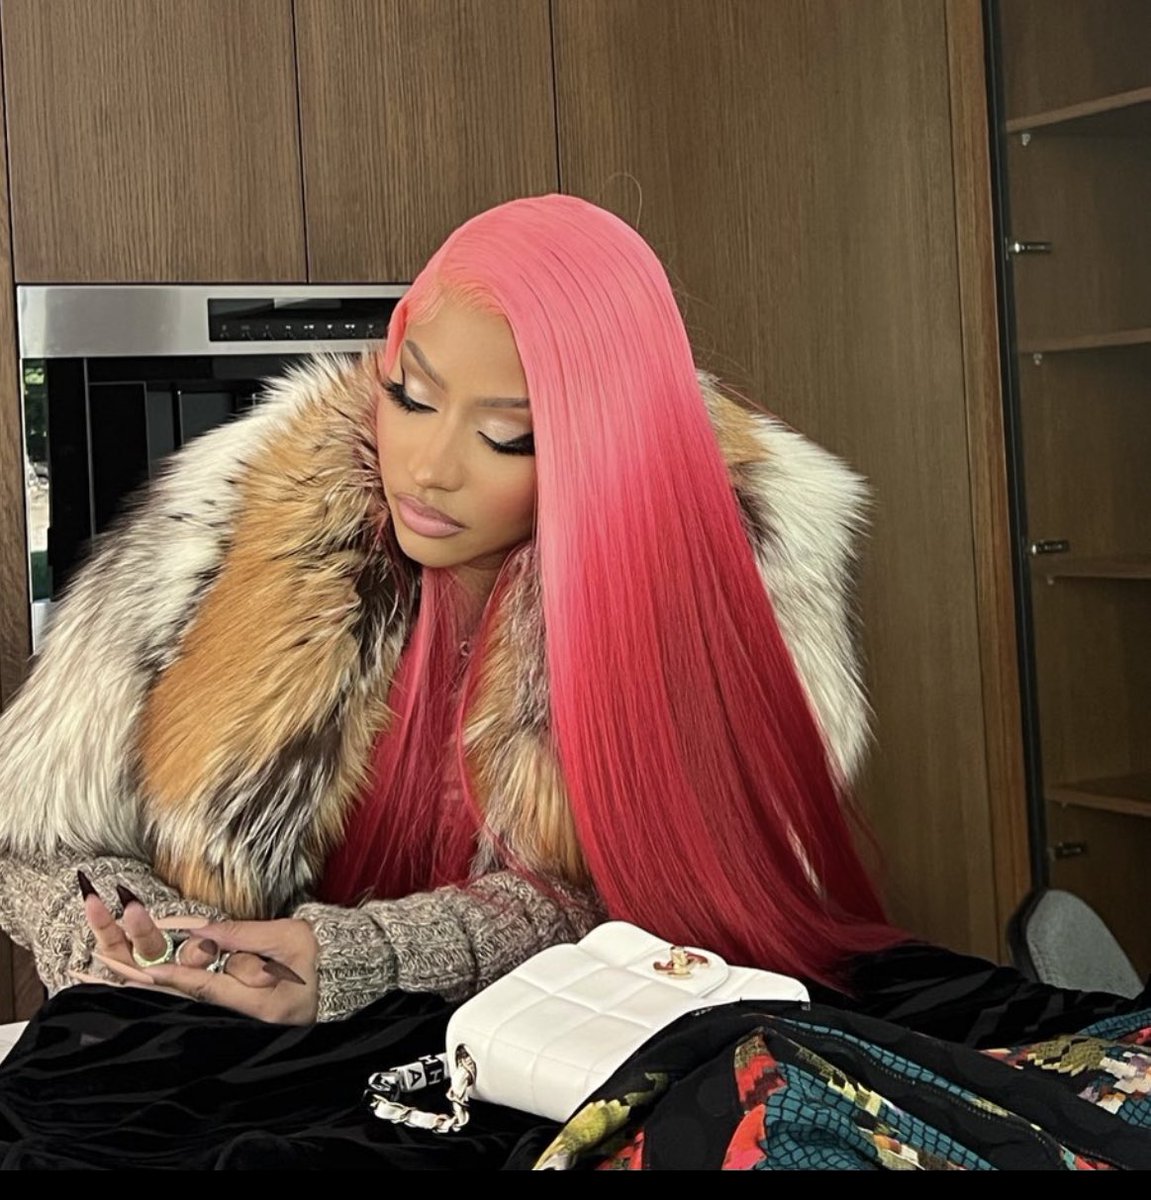 since we tlkng wigs, can i get this one Queeny?? @NICKIMINAJ #SOLDOUTGARAGESALE